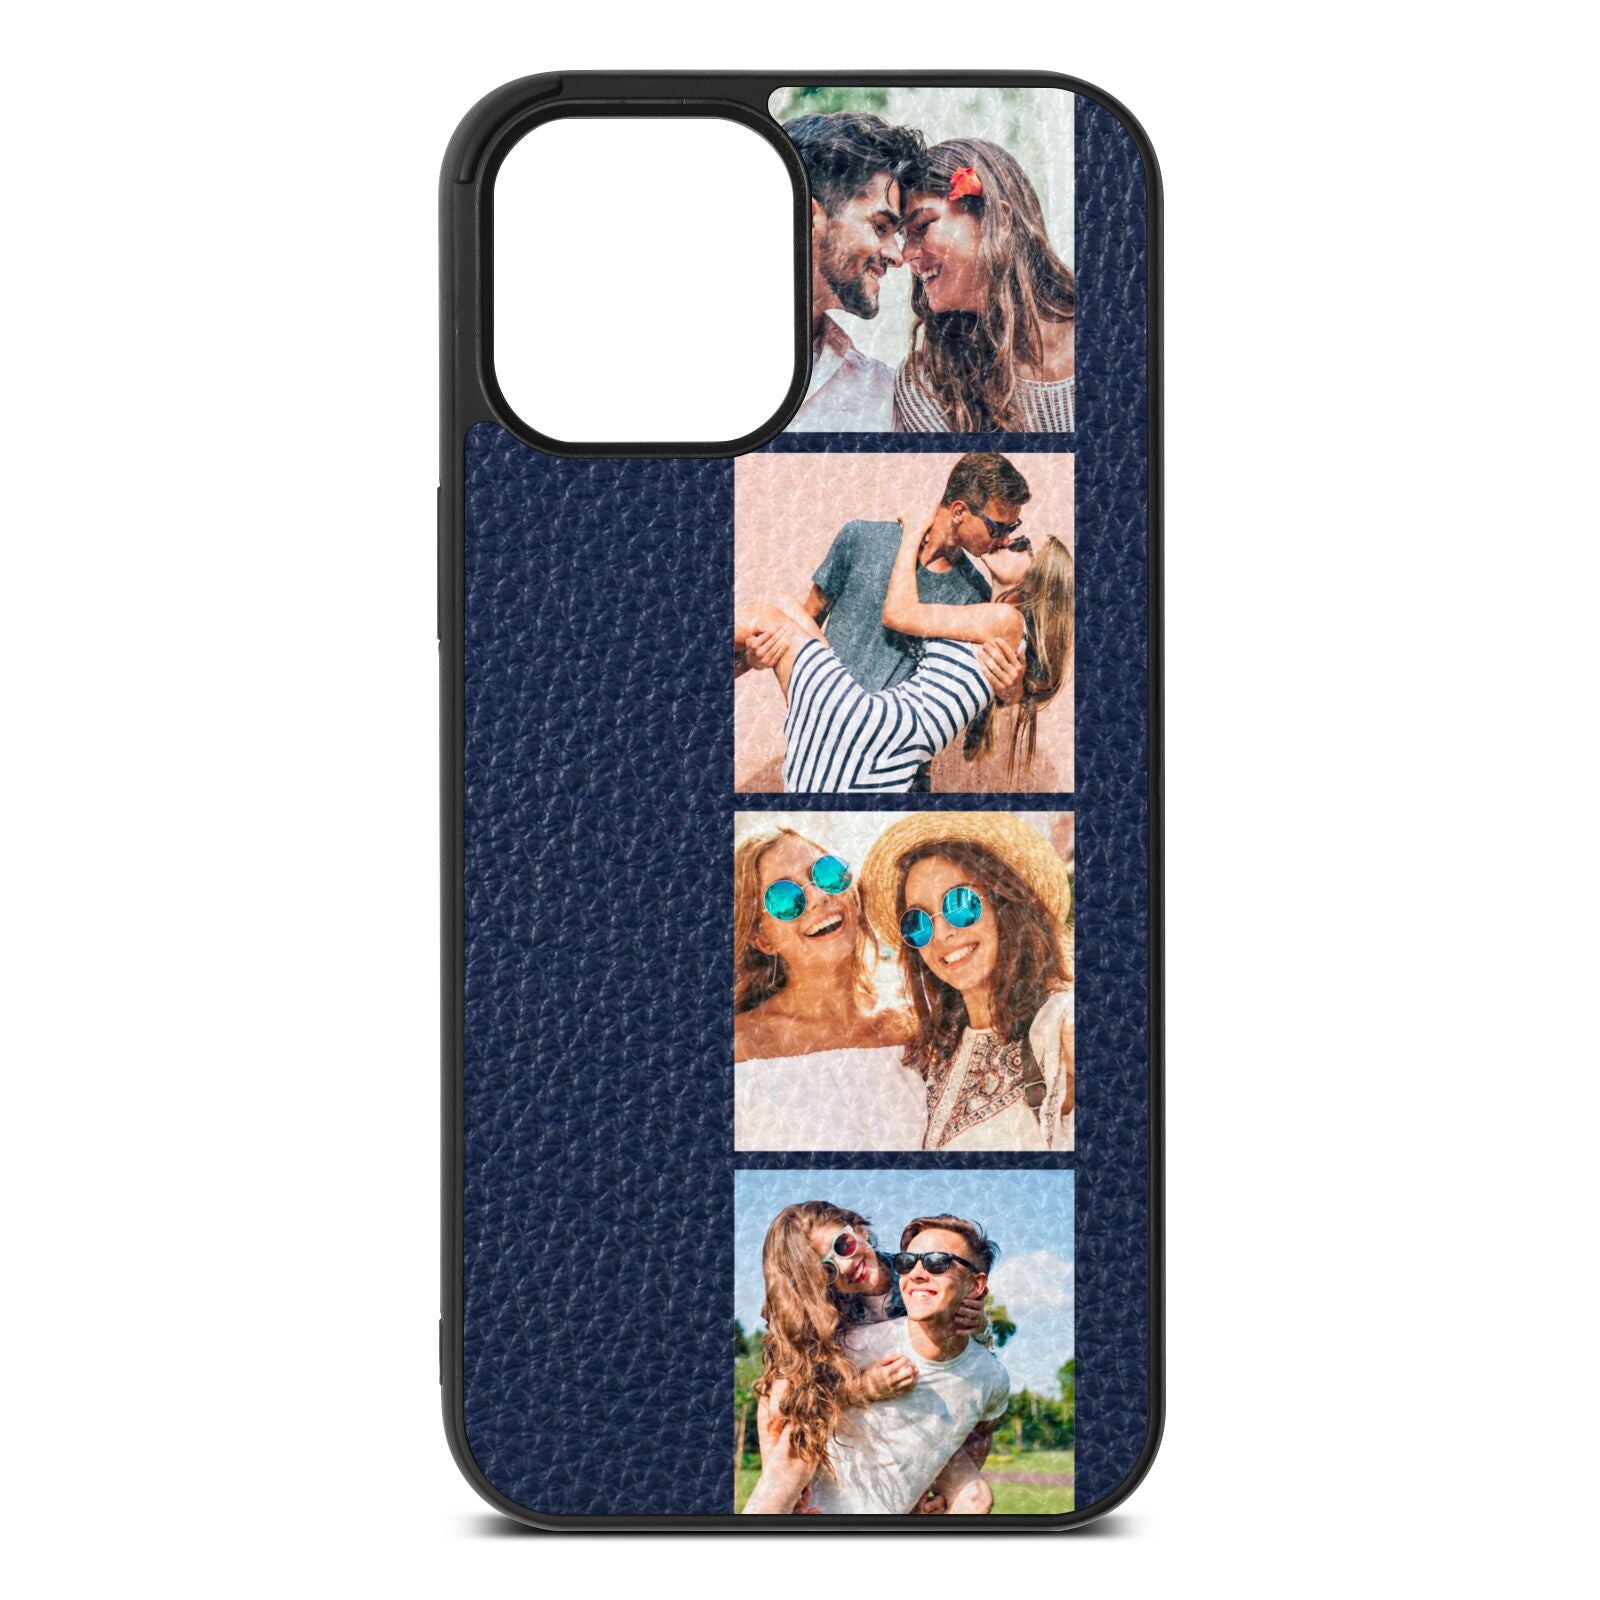 Photo Strip Montage Upload Navy Blue Pebble Leather iPhone 12 Pro Max Case